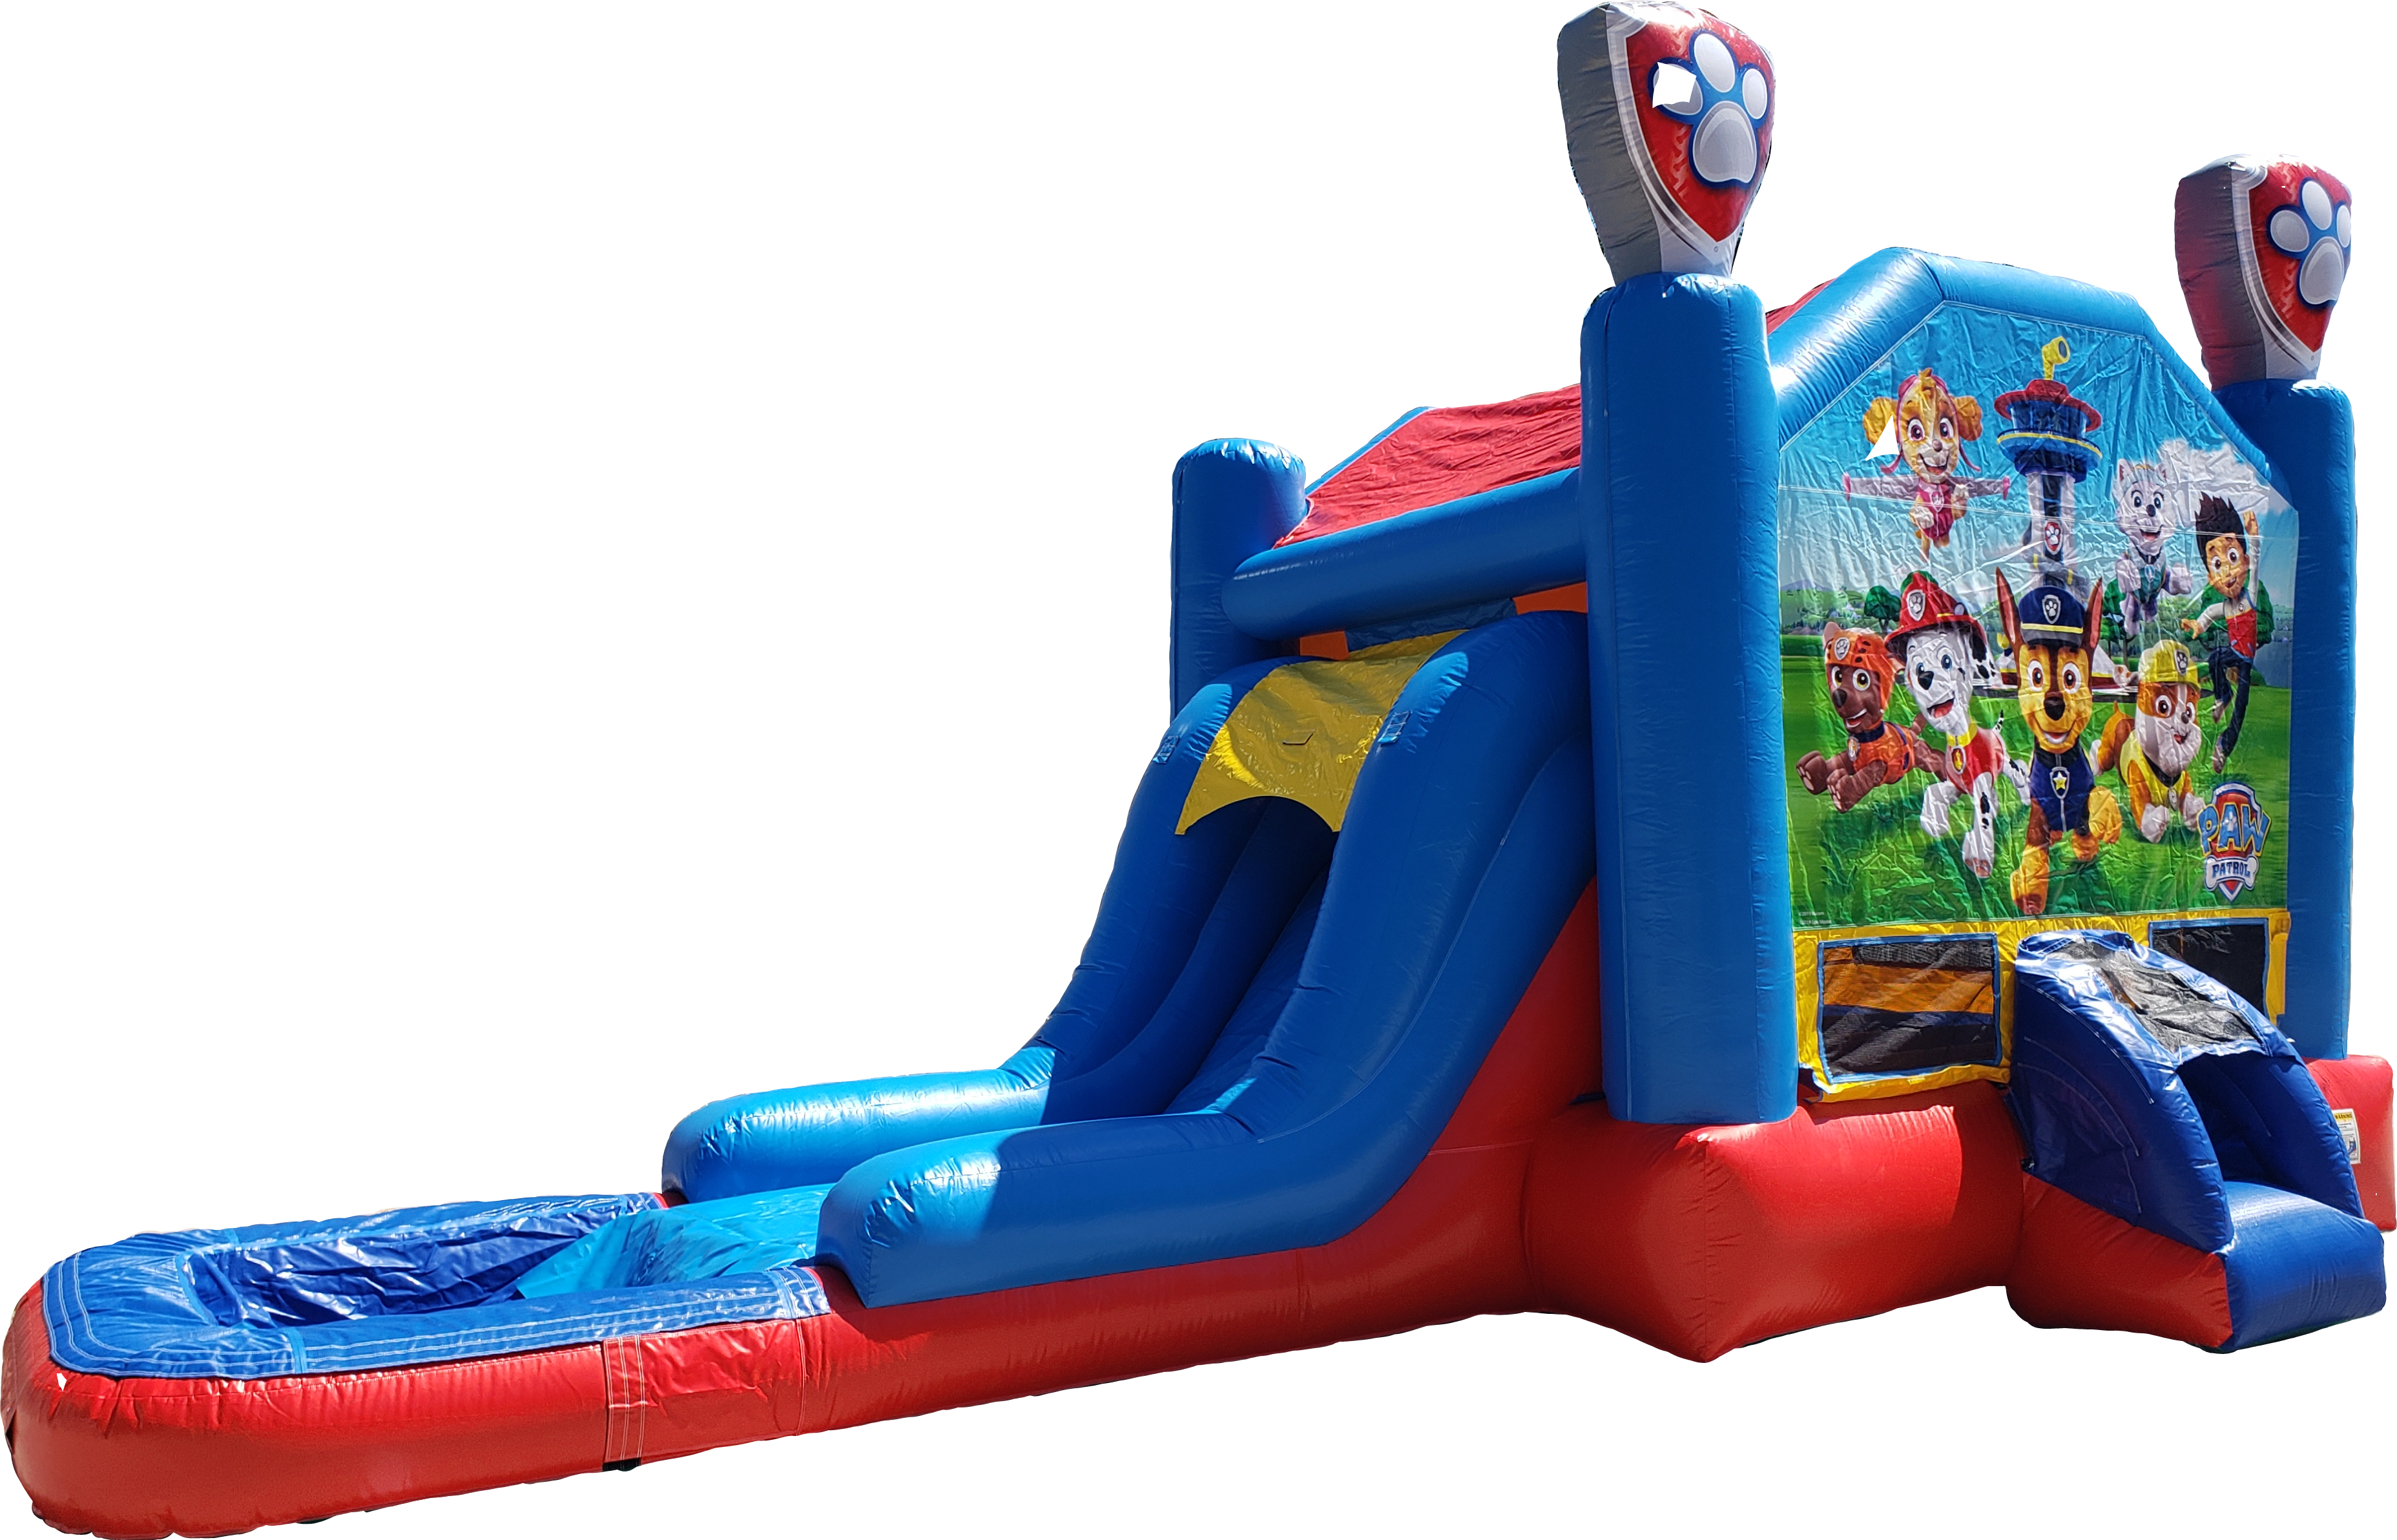 Paw Patrol wet or dry Picture